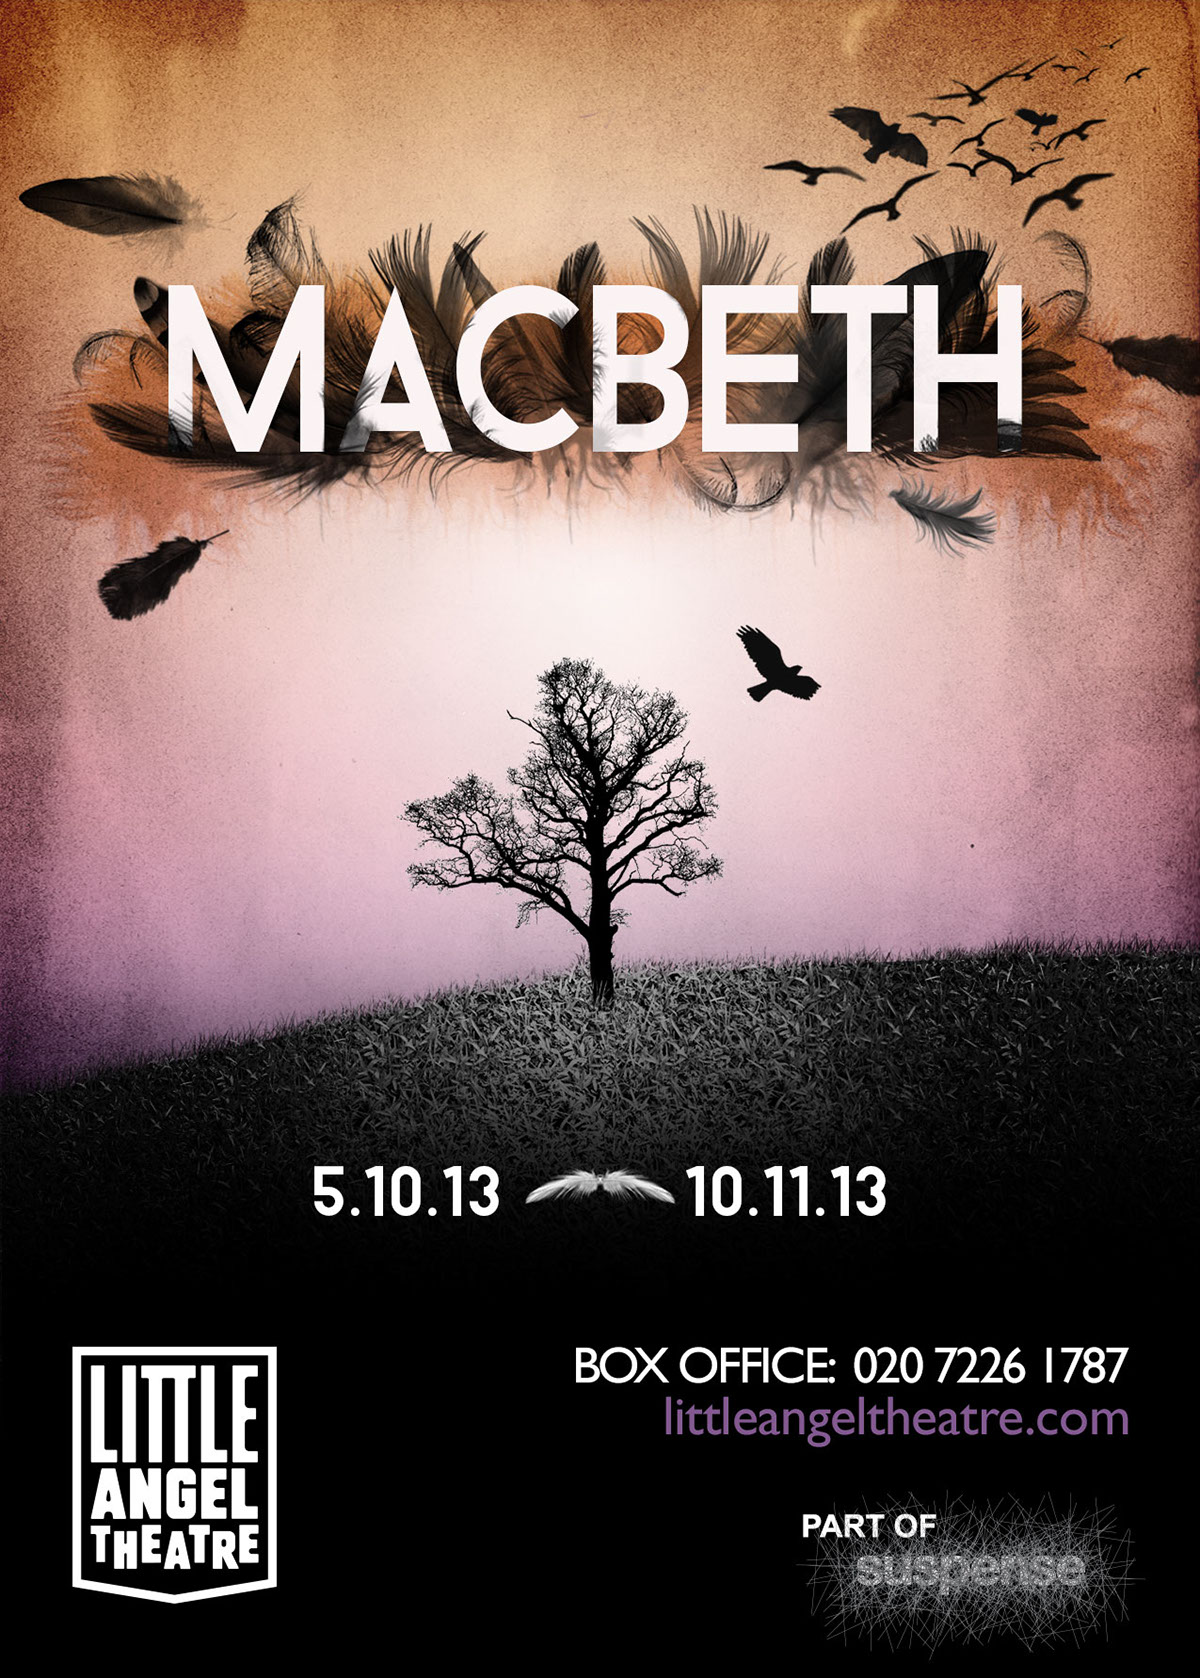 Little angel theatre Poster Design Theatre play Macbeth dark mysterious feathers